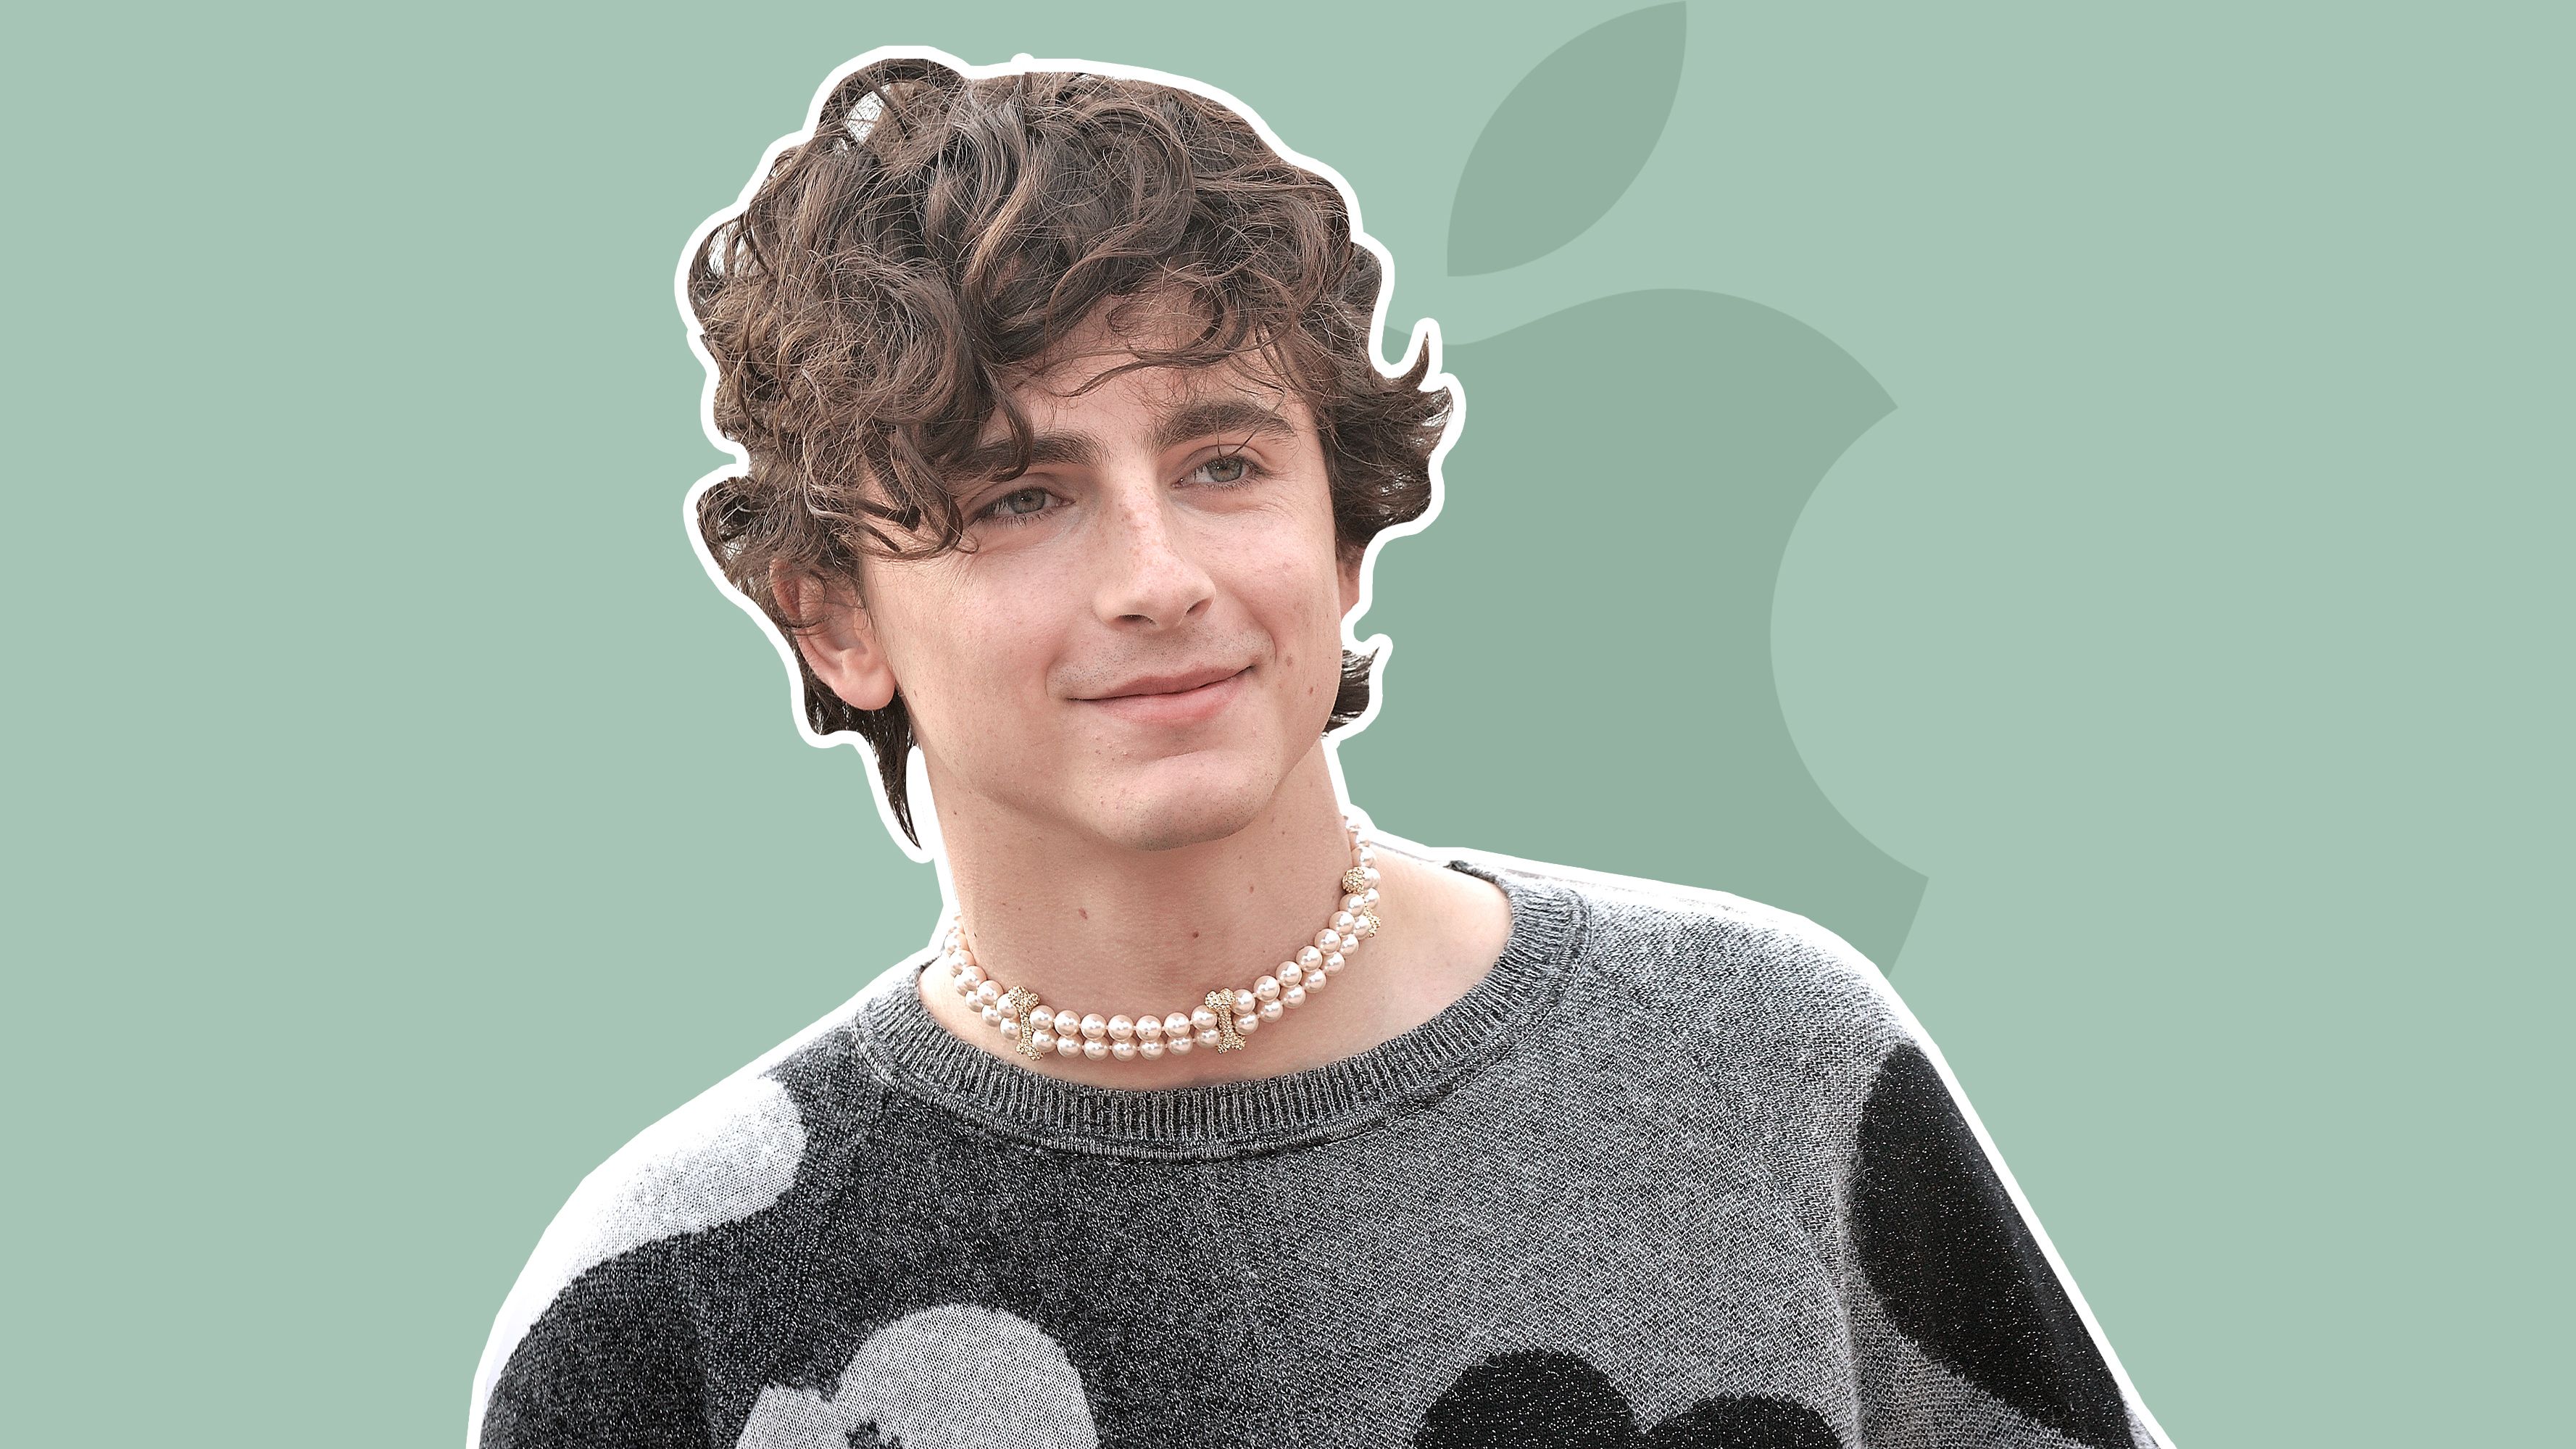 Which Apple TV+ Series Will Timothée Chalamet Join?